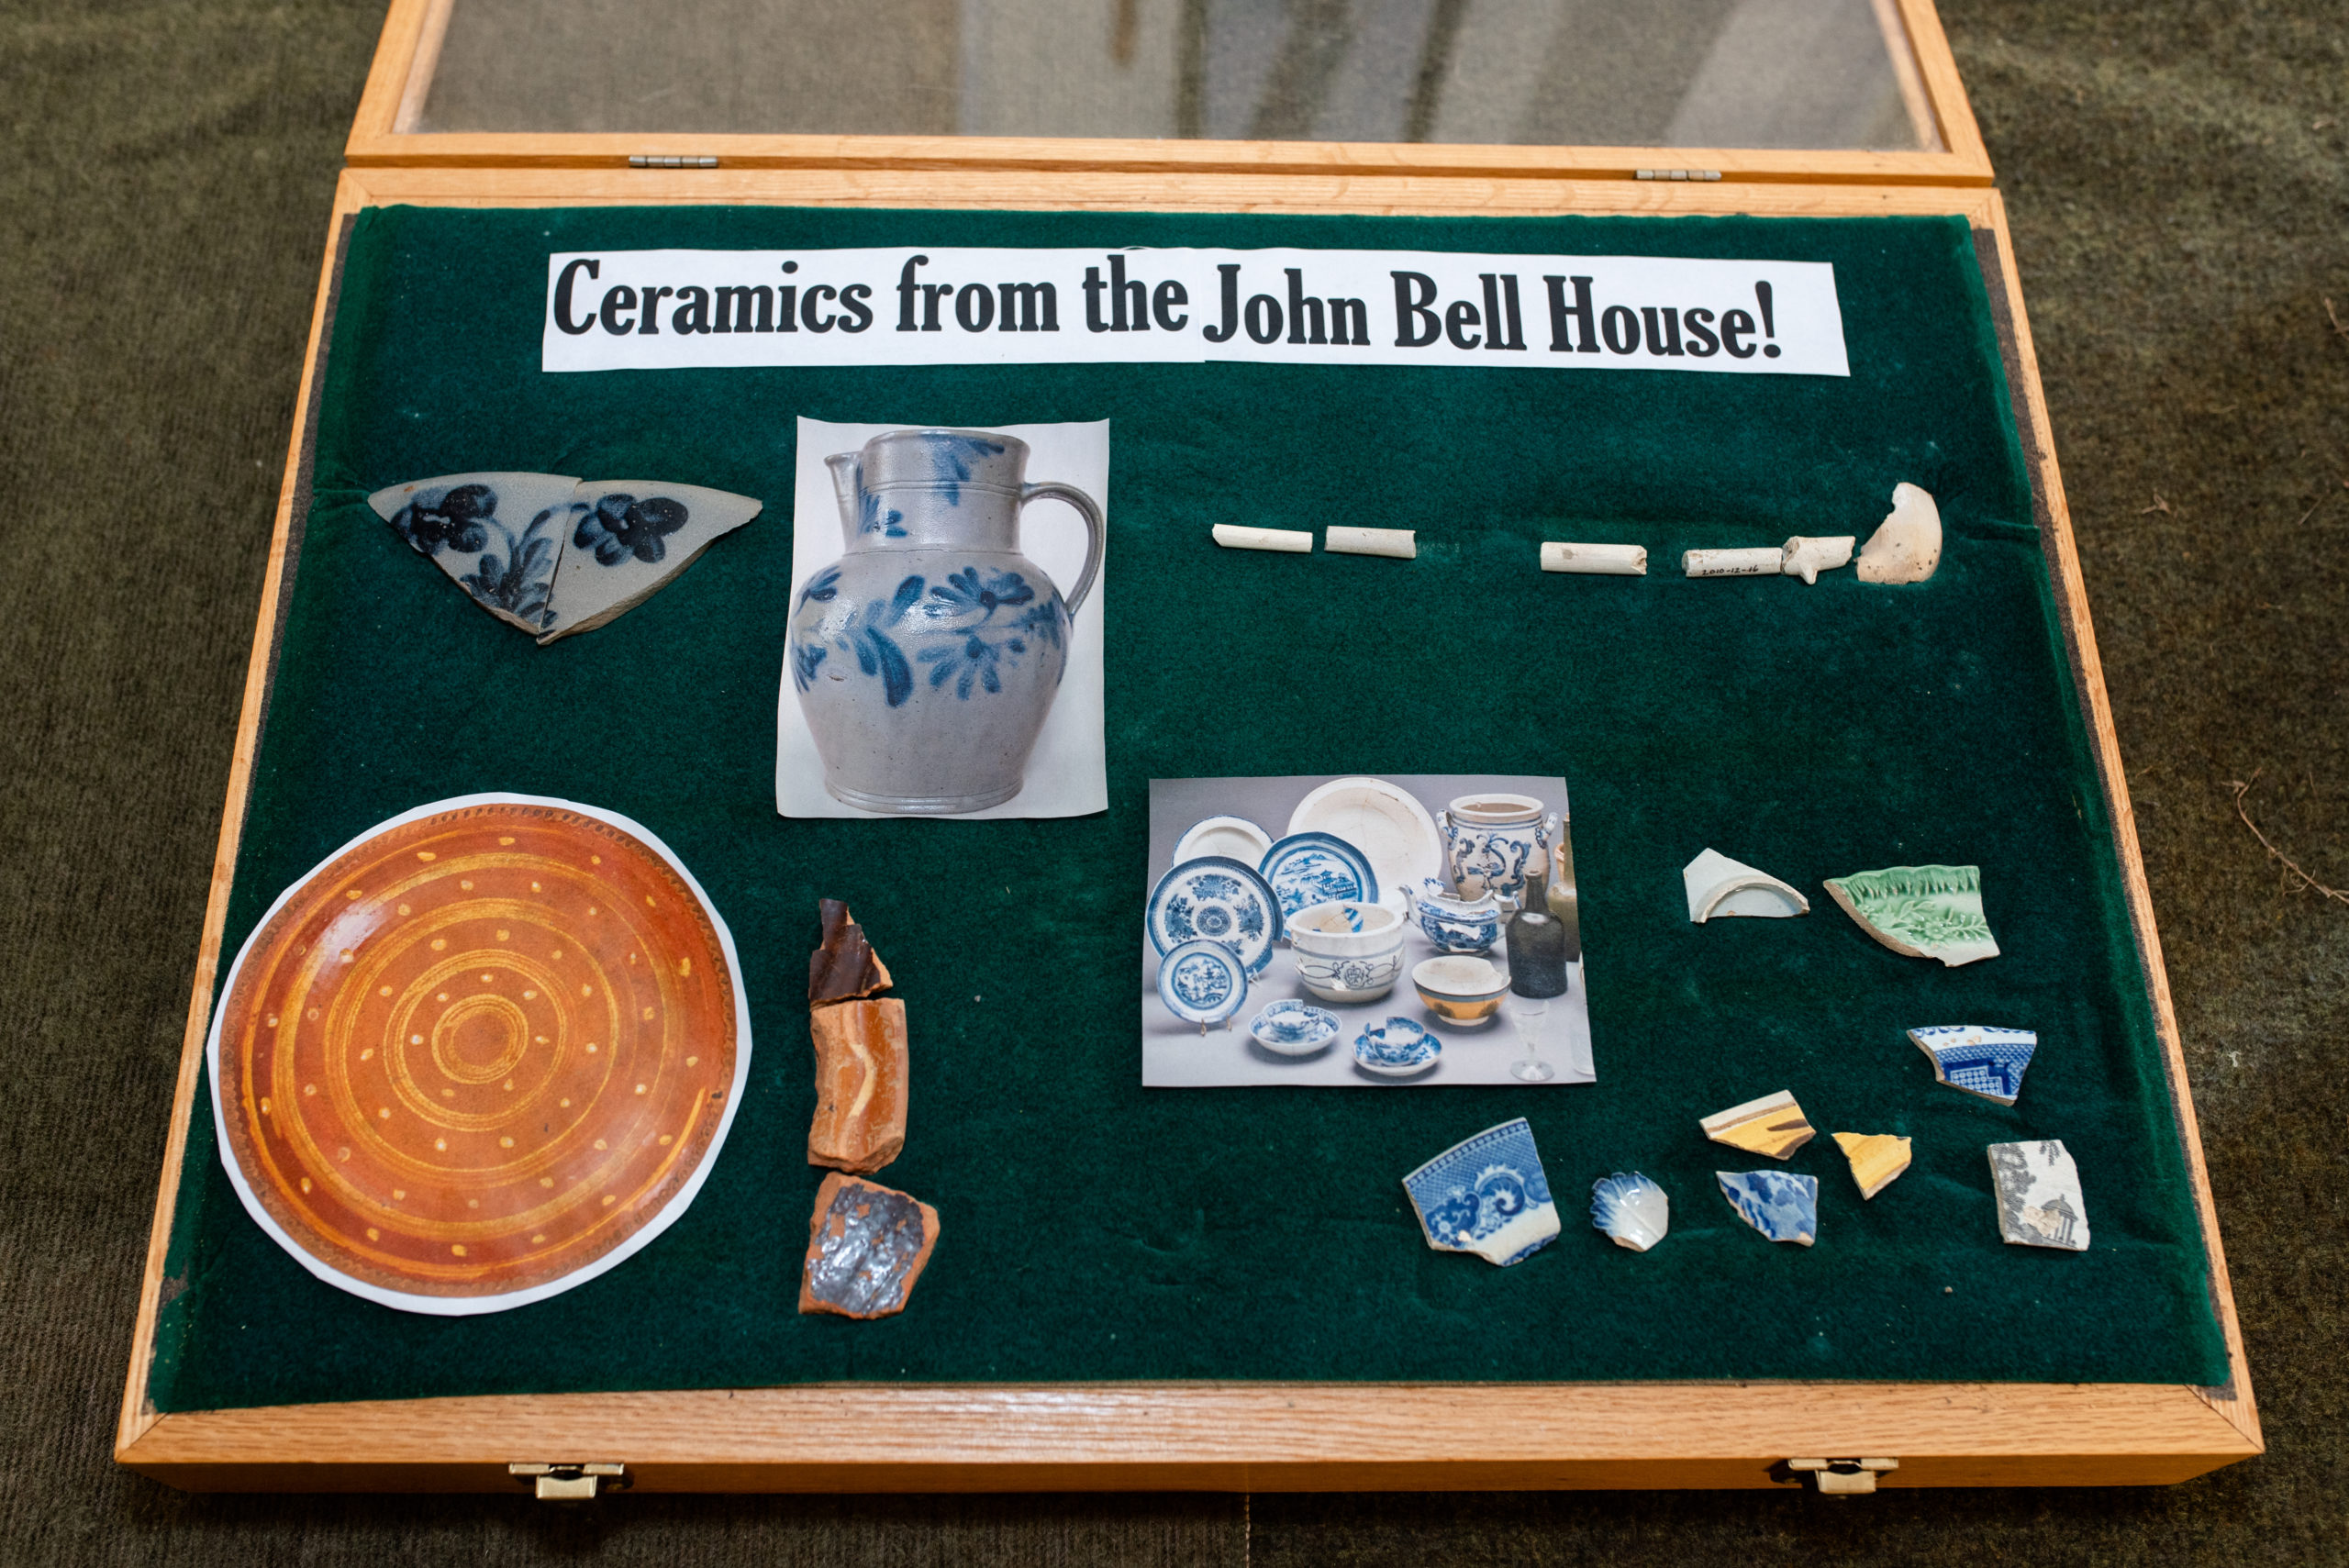 Display case of ceramic artifacts from the excavation site